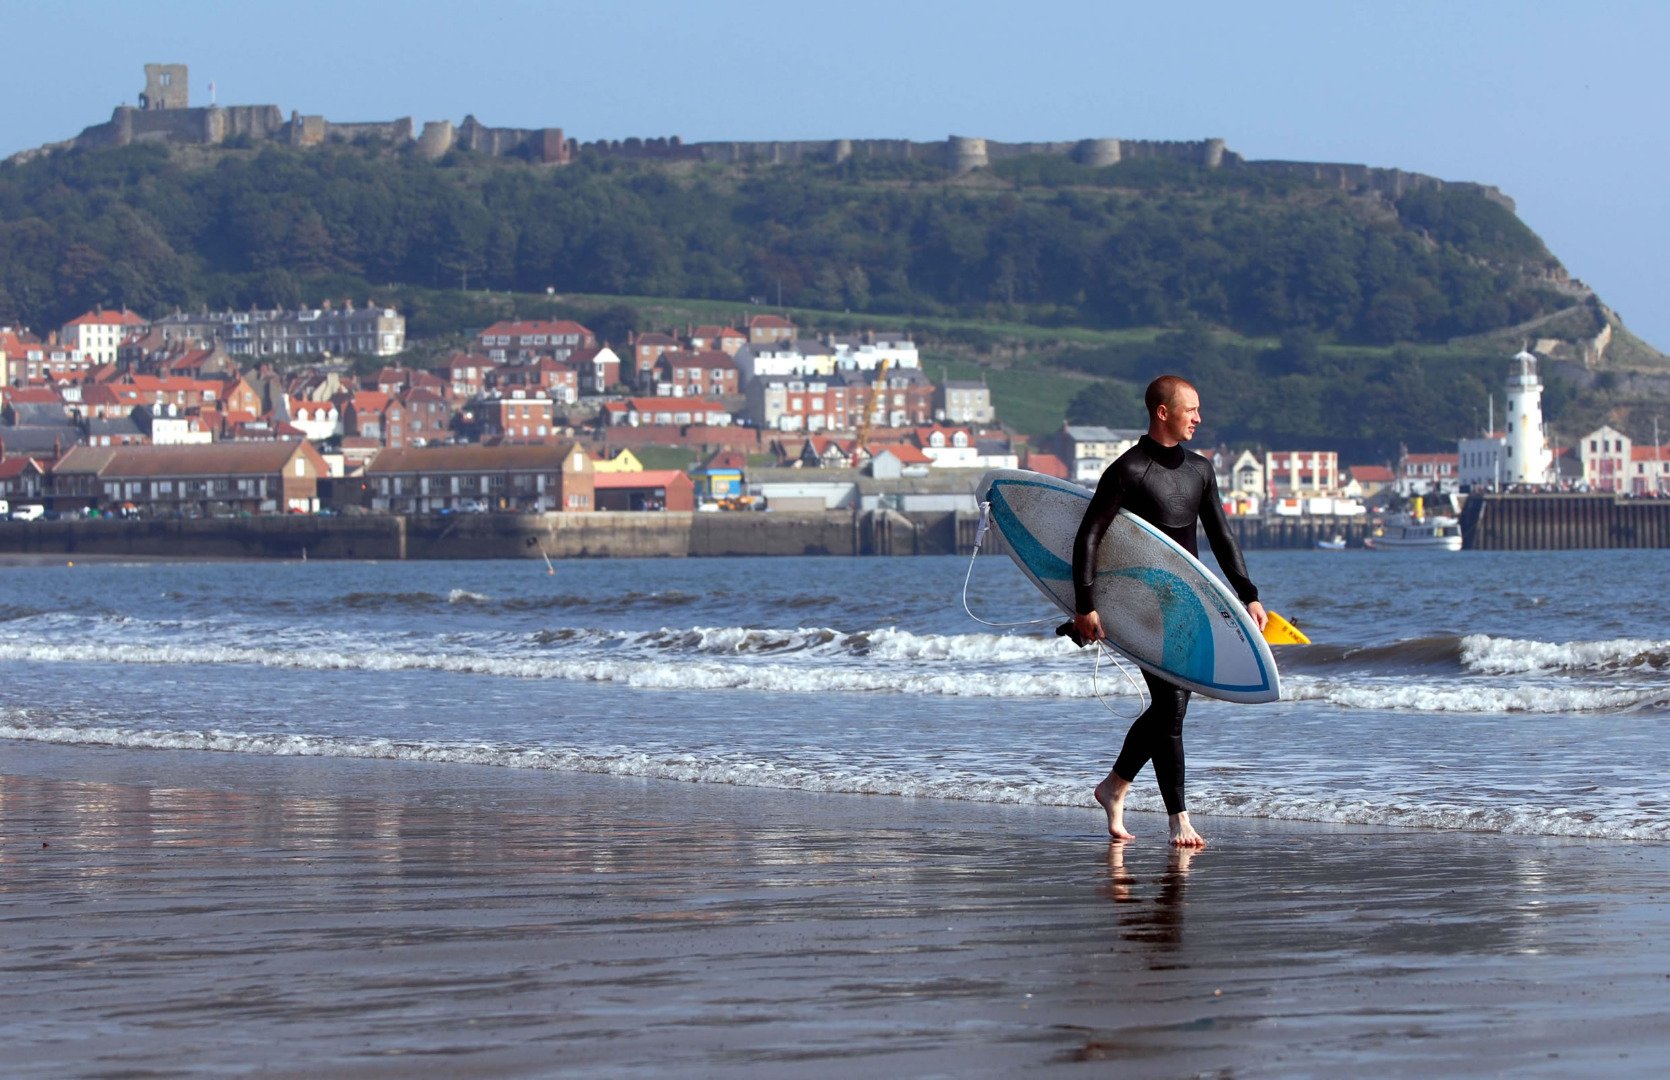 Surfer carrying surf board at South Bay Scarborough